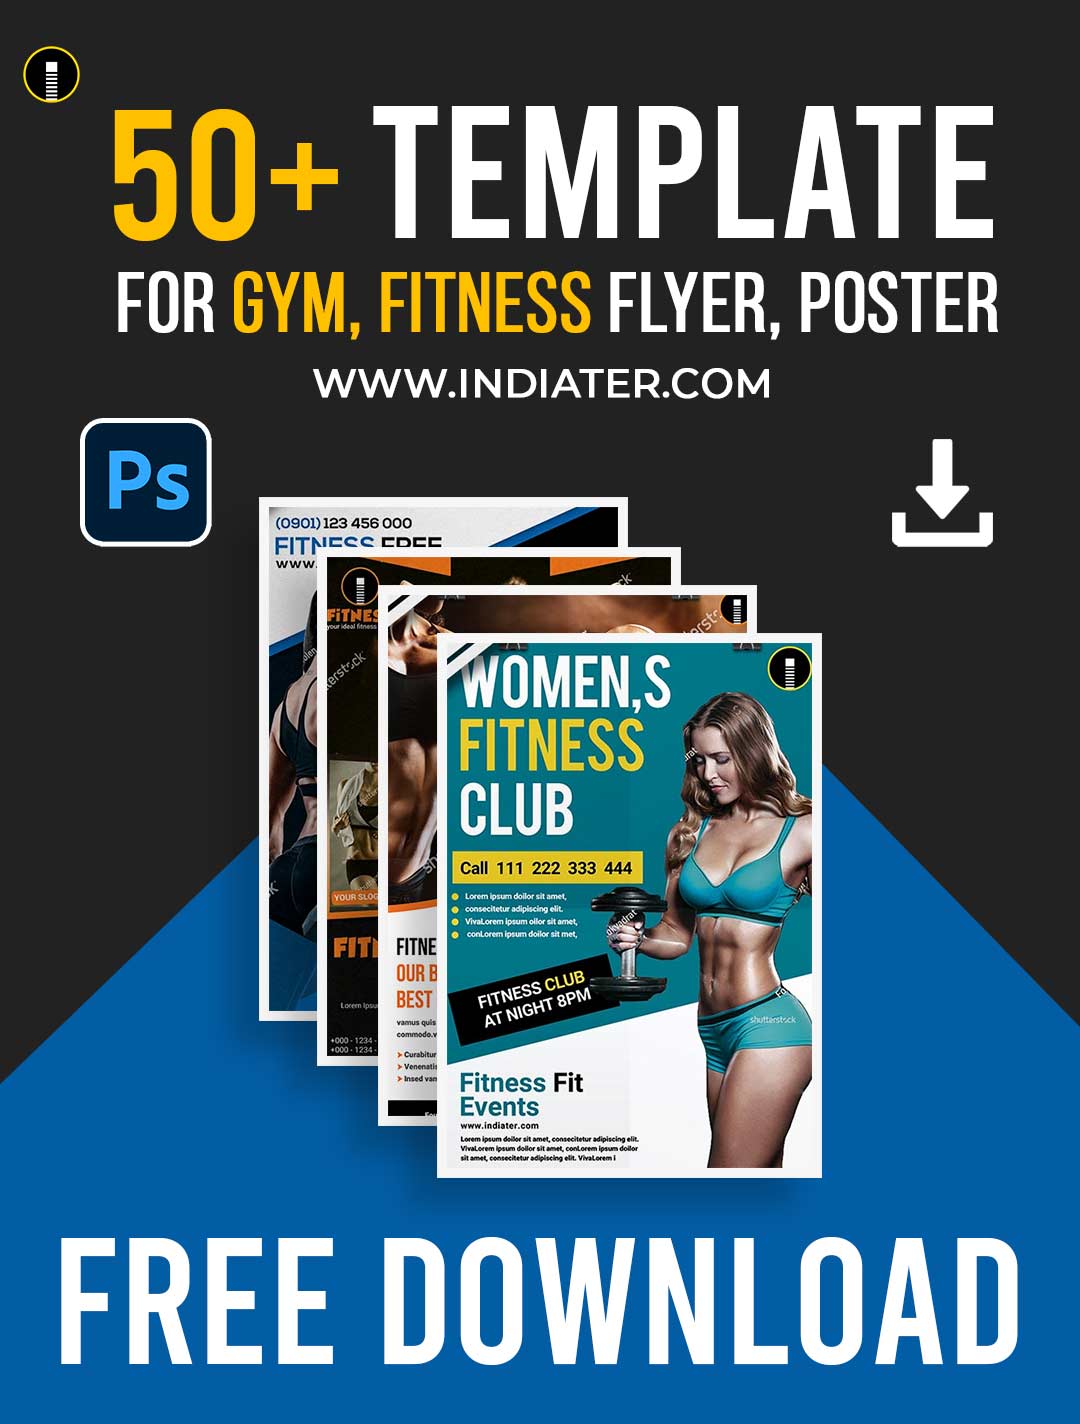 FREE 50+ Customize Gym Fitness Centre Promotion Poster or Flyer Photoshop  Template - Indiater